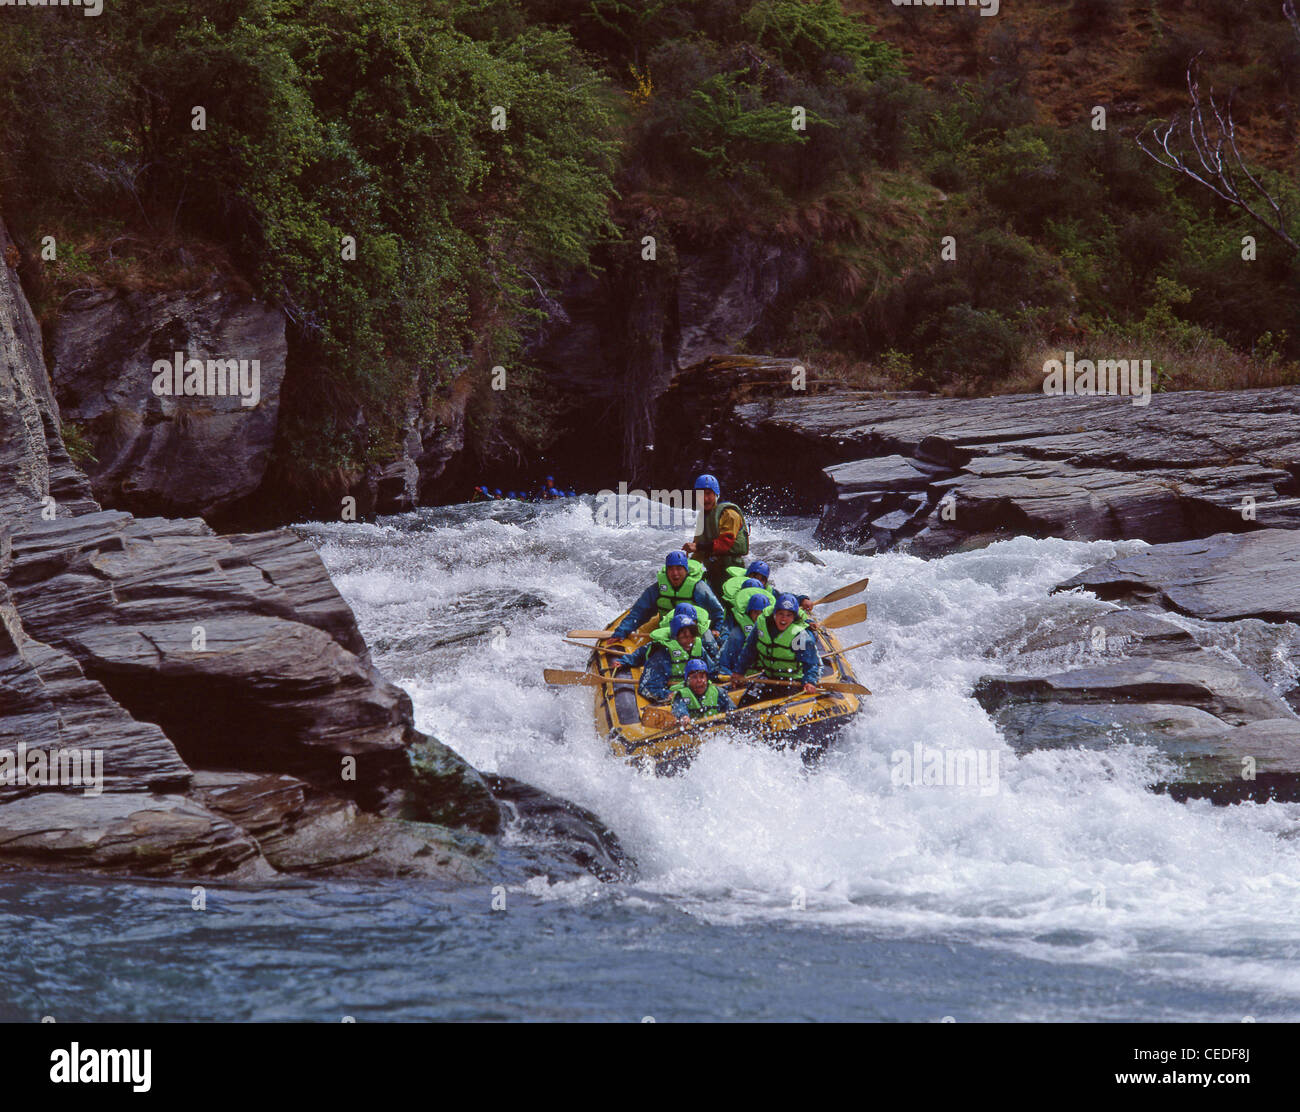 Rafting on Shotover River, Queenstown, Otago Region, South Island, New Zealand Stock Photo